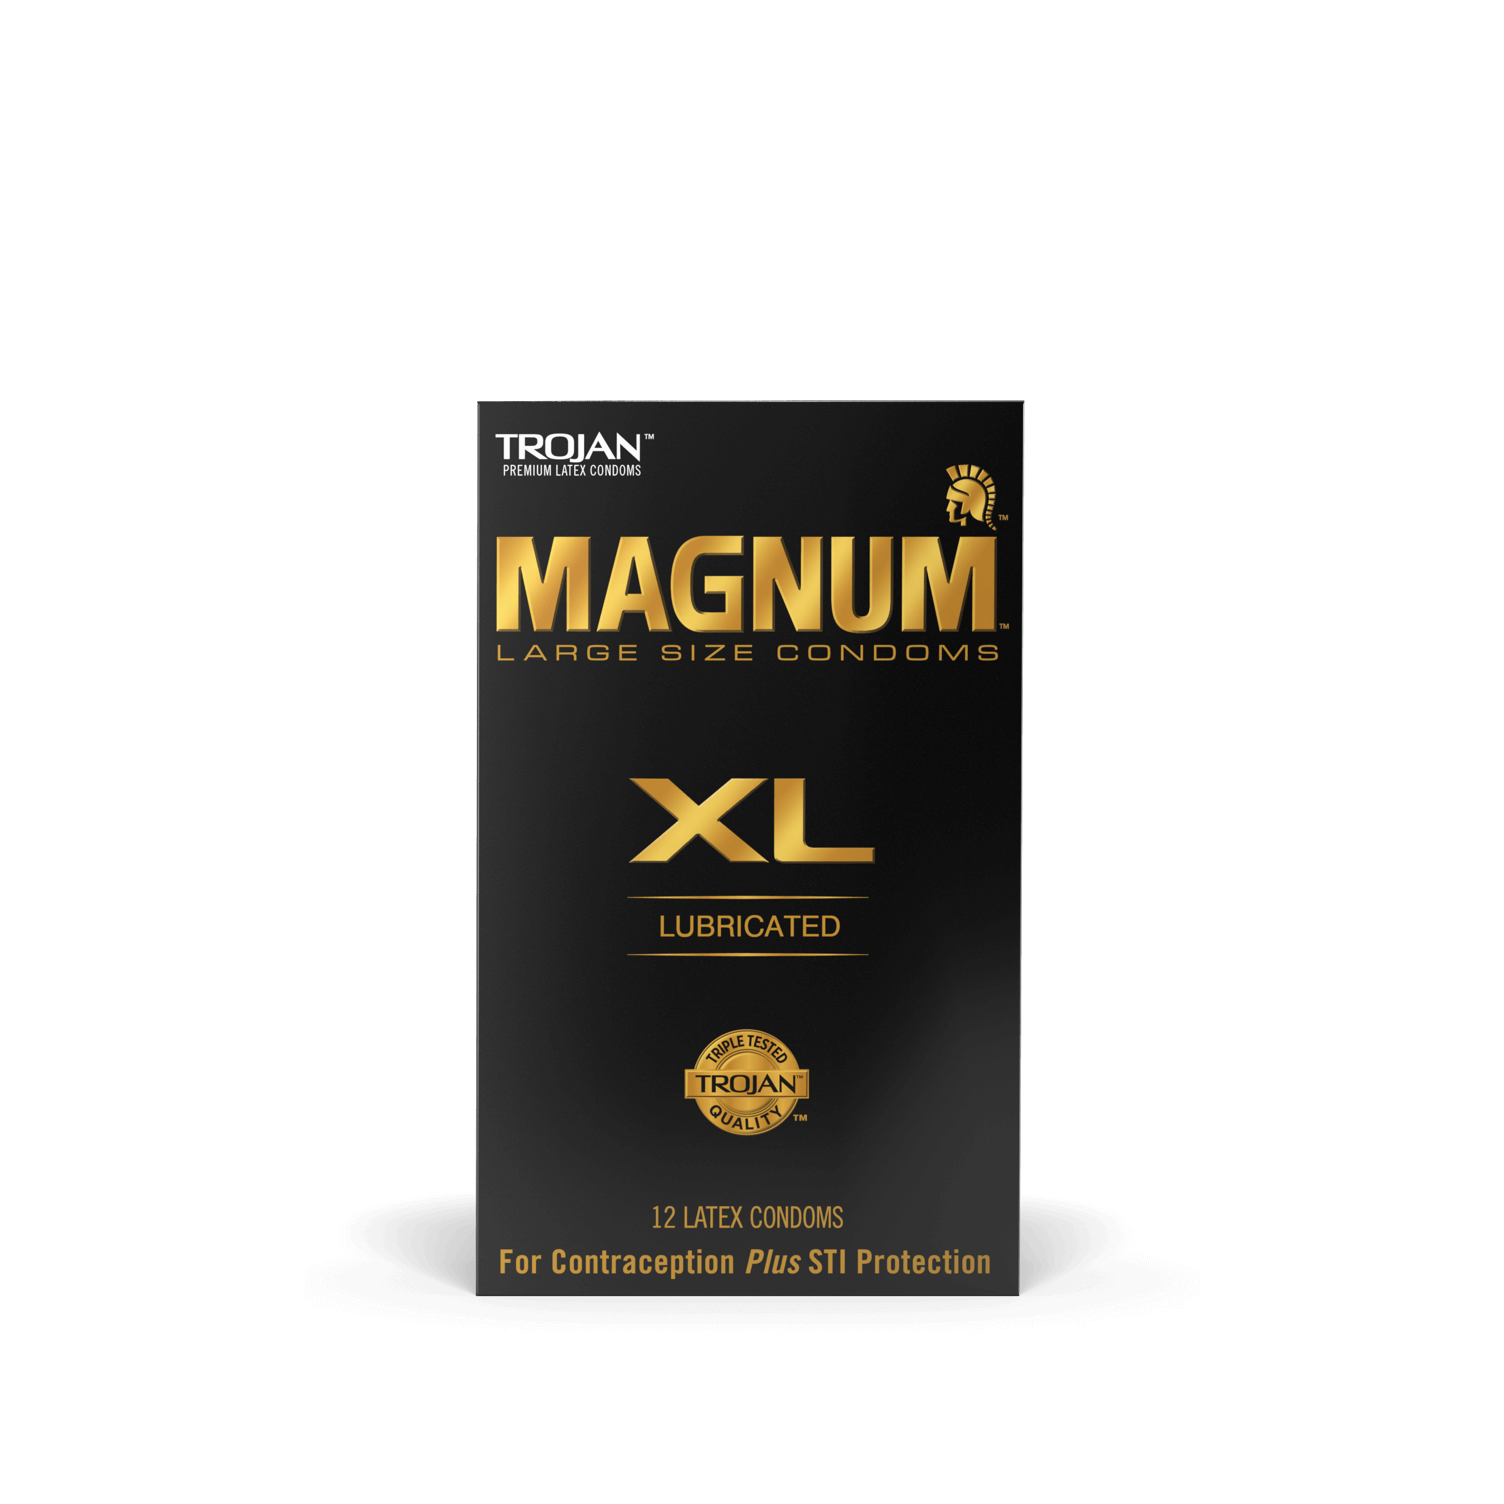 My Size Condoms My Size Condoms 36 Pack (64mm)